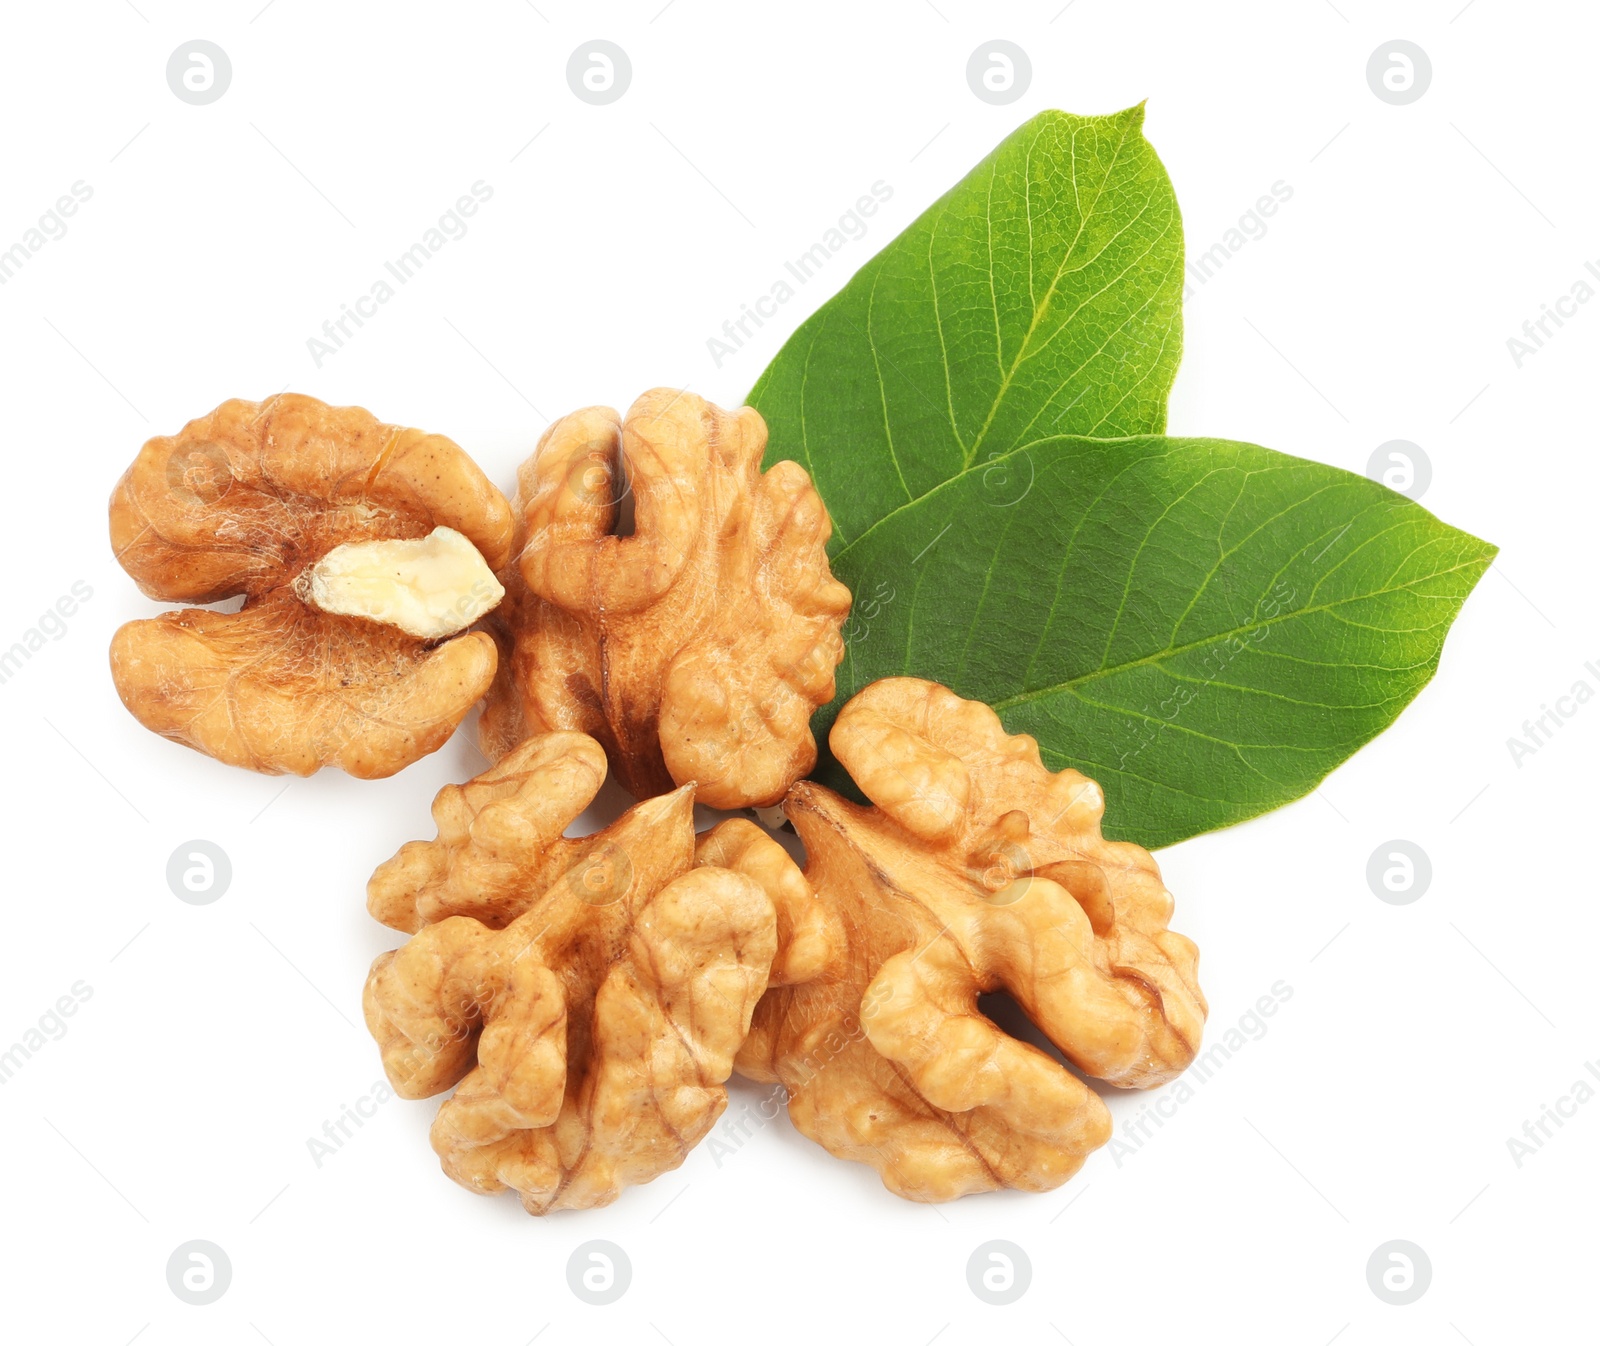 Photo of Pile of peeled walnuts and leaves on white background, top view